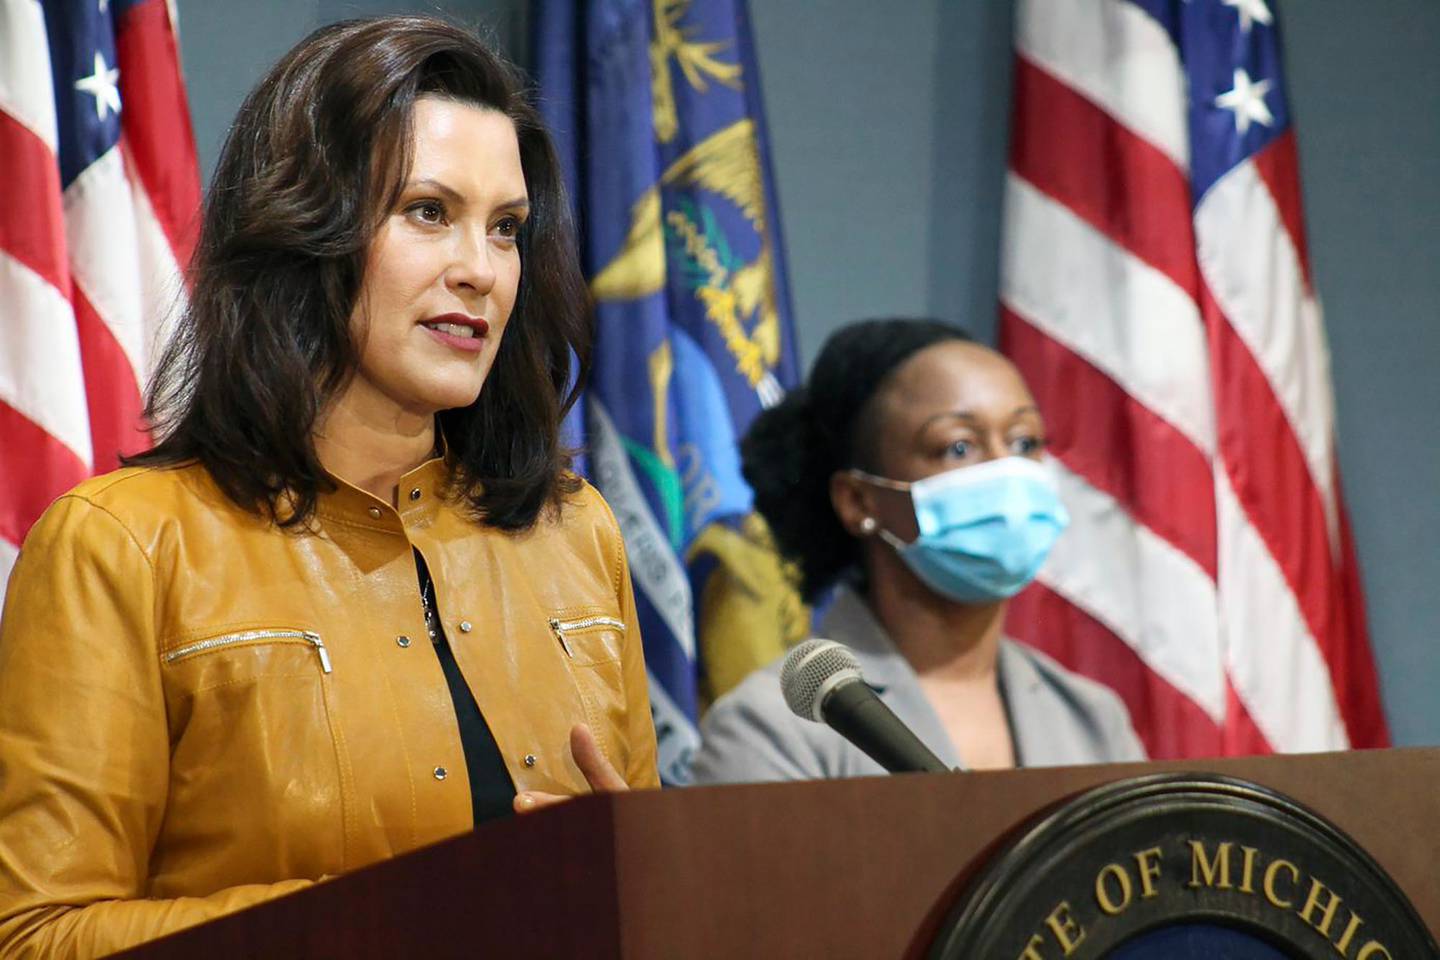 In this photo provided by the Michigan Office of the Governor, Michigan Gov. Gretchen Whitmer addresses the state during a speech in Lansing, Mich., Thursday, May 7, 2020. Whitmer said that auto and other manufacturing workers can return to the job next week, further easing her stay-at-home order while extending it through May 28 because of the coronavirus pandemic. (Michigan Office of the Governor via AP, Pool)